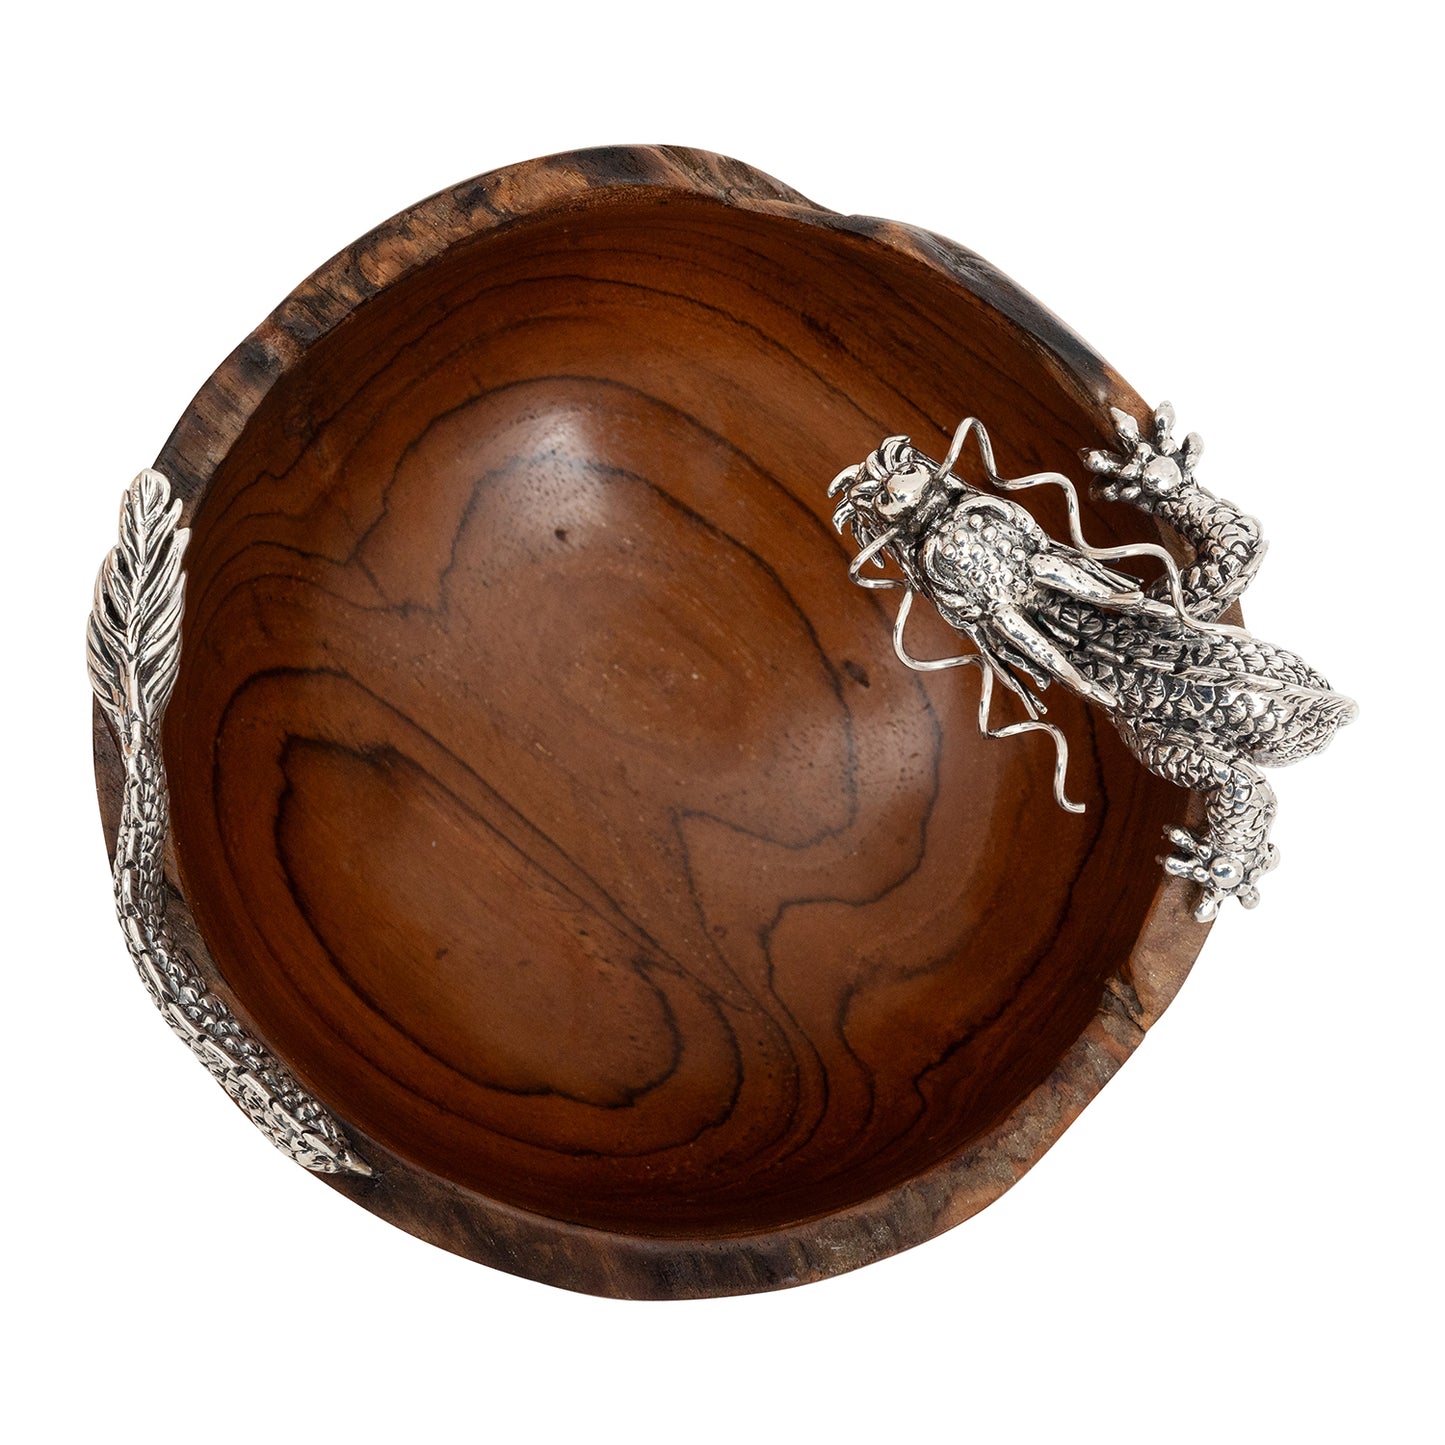 Teak Bowl with Sterling Silver Dragon